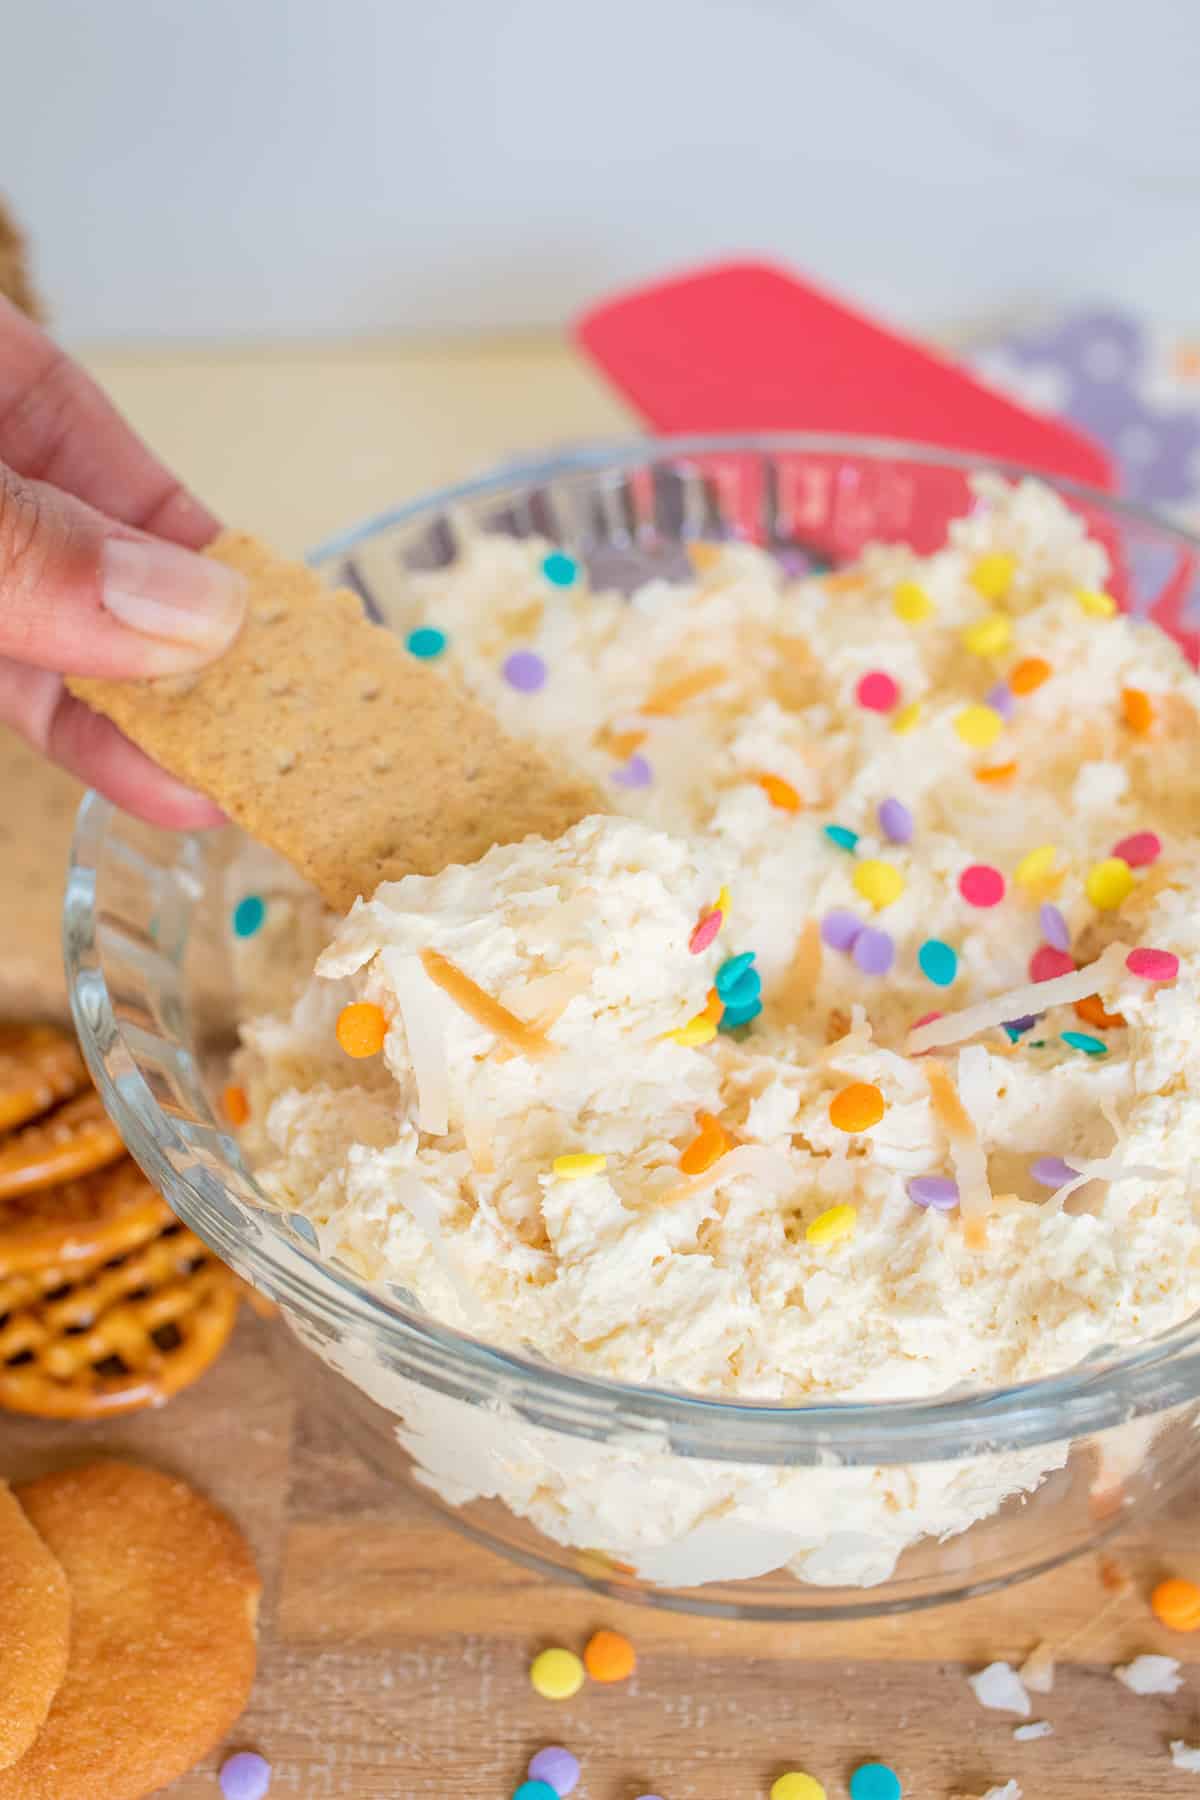 A person dipping a biscuit into a bowl of colorful sprinkle-topped coconut cream dip.